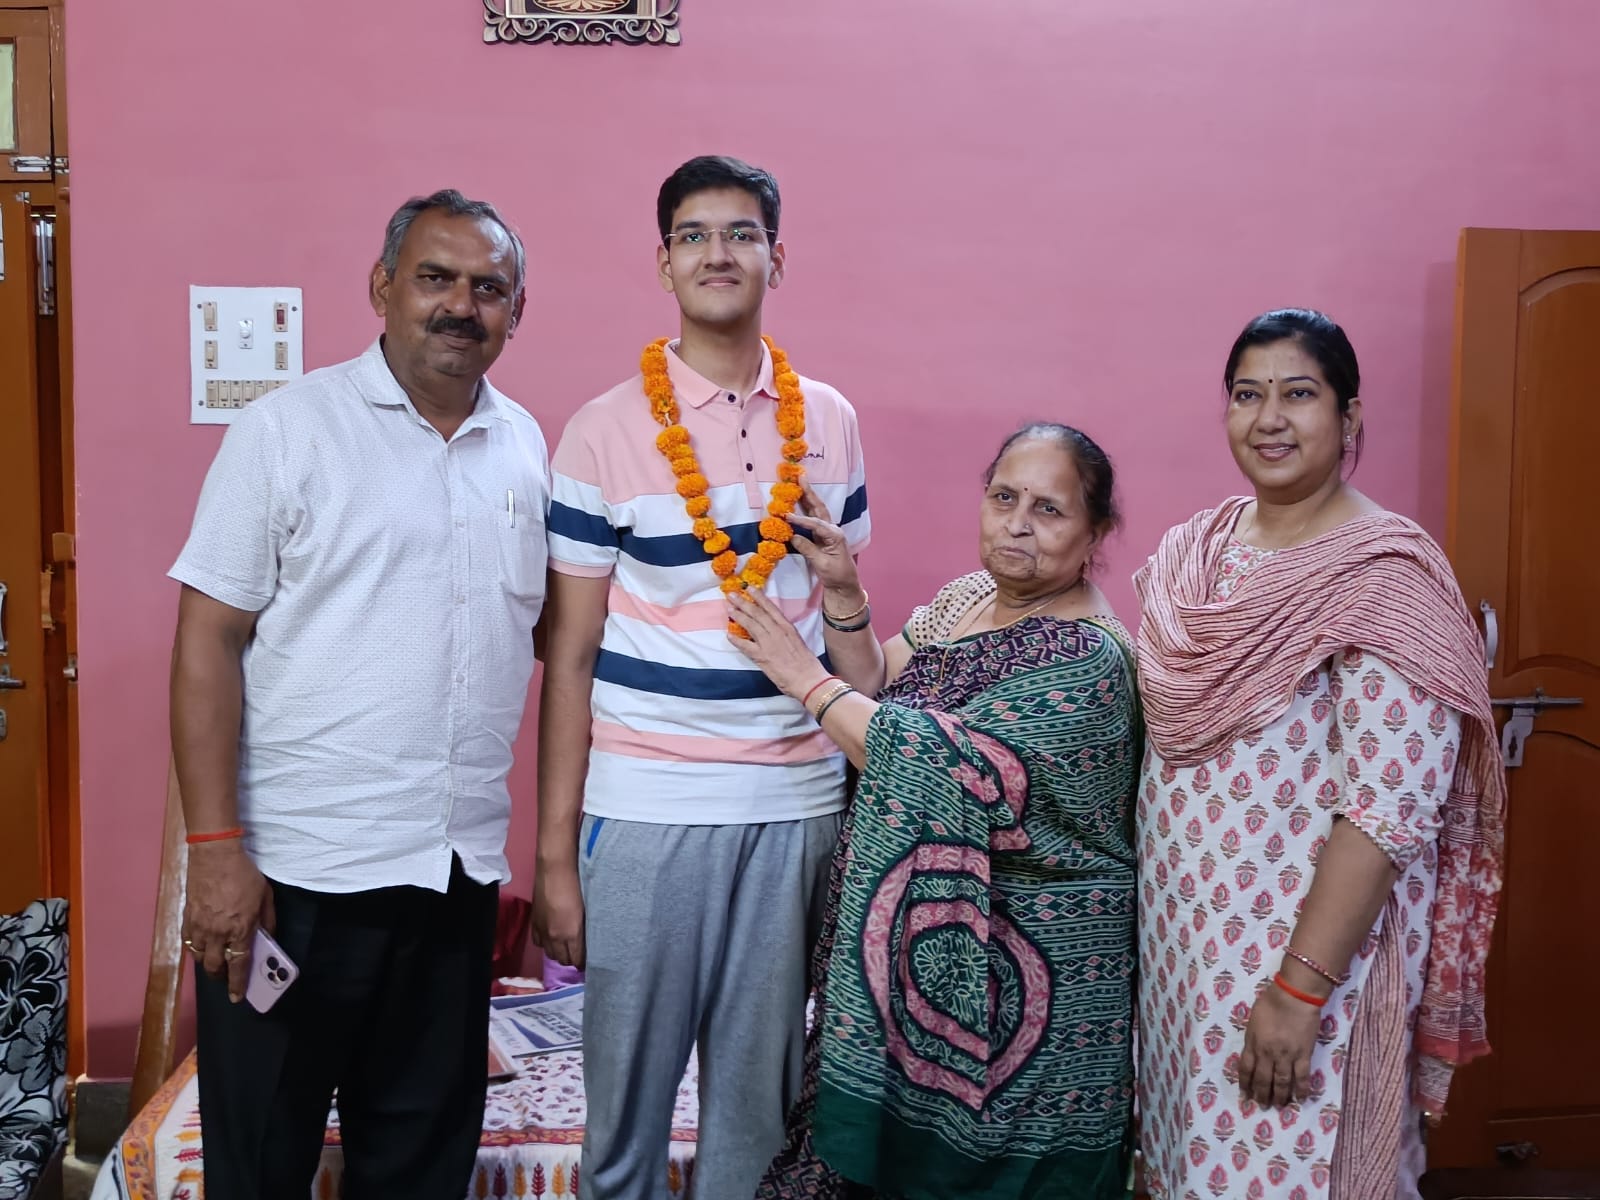 Atulit Pandey brought glory to his school, family and district by passing ISC 12th exam with 96 percent marks.